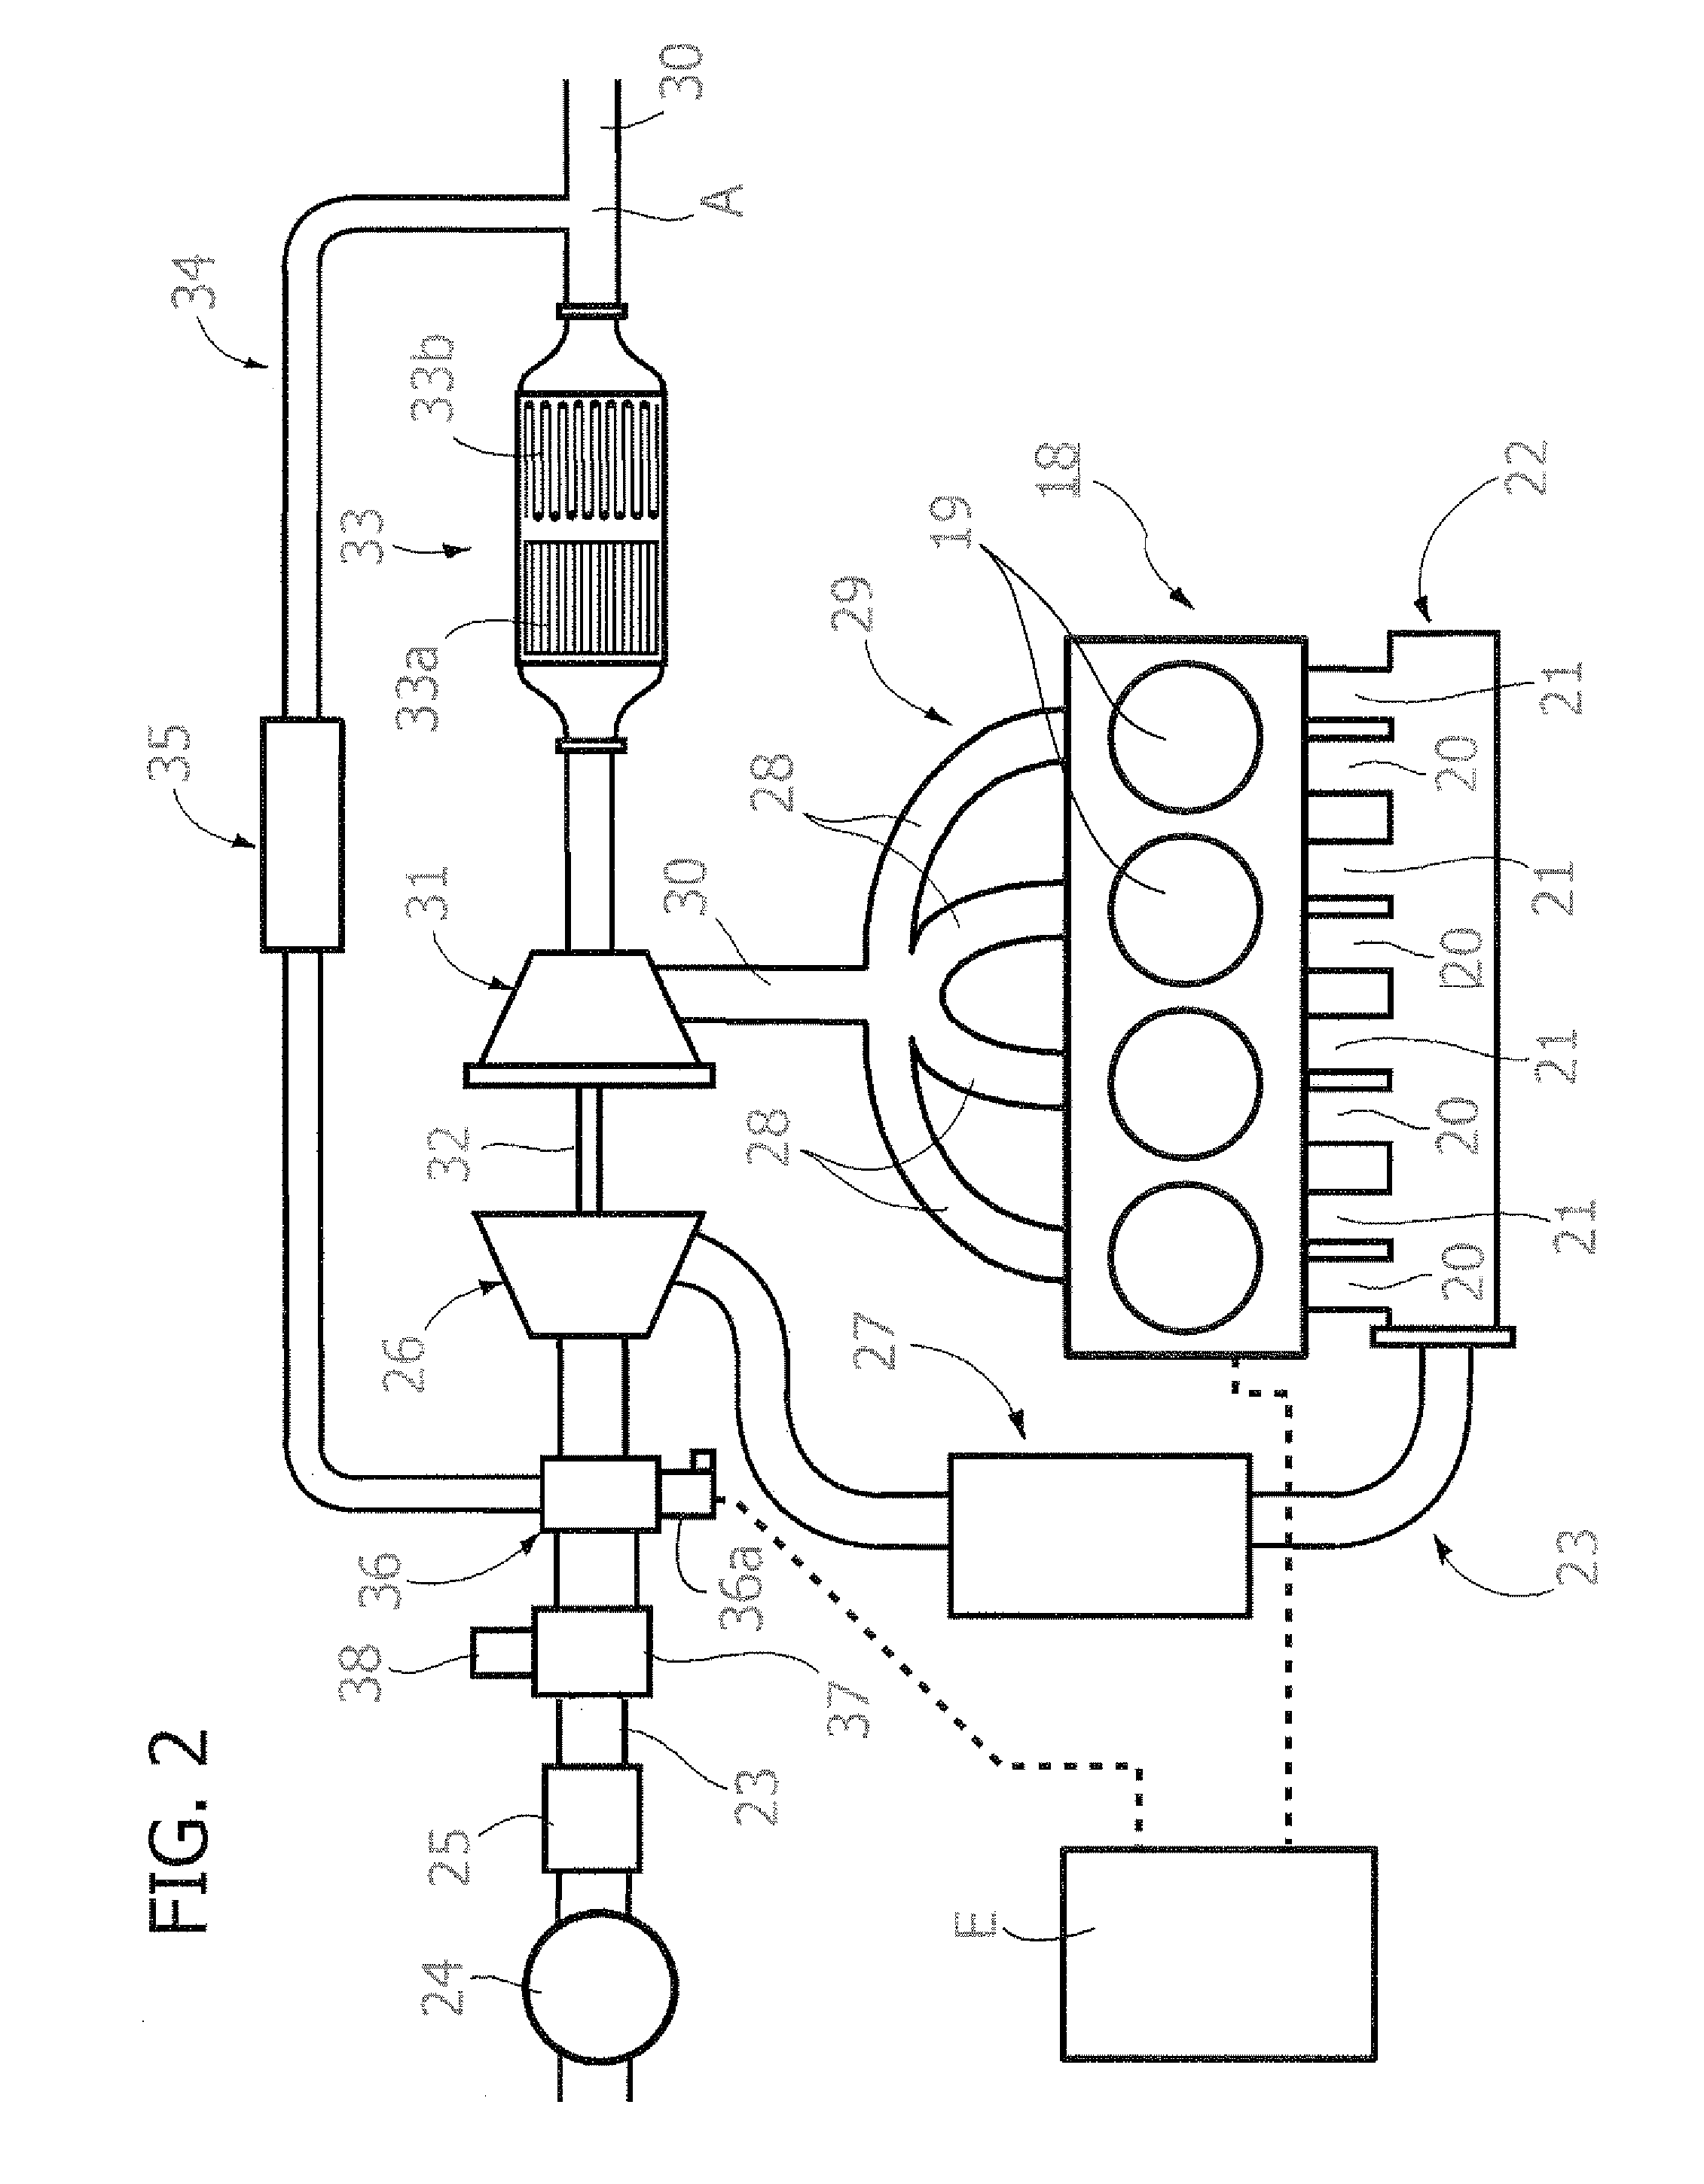 Diesel engine having cams for controlling the intake valves, which have a main lobe and an additional lobe radiused to each other